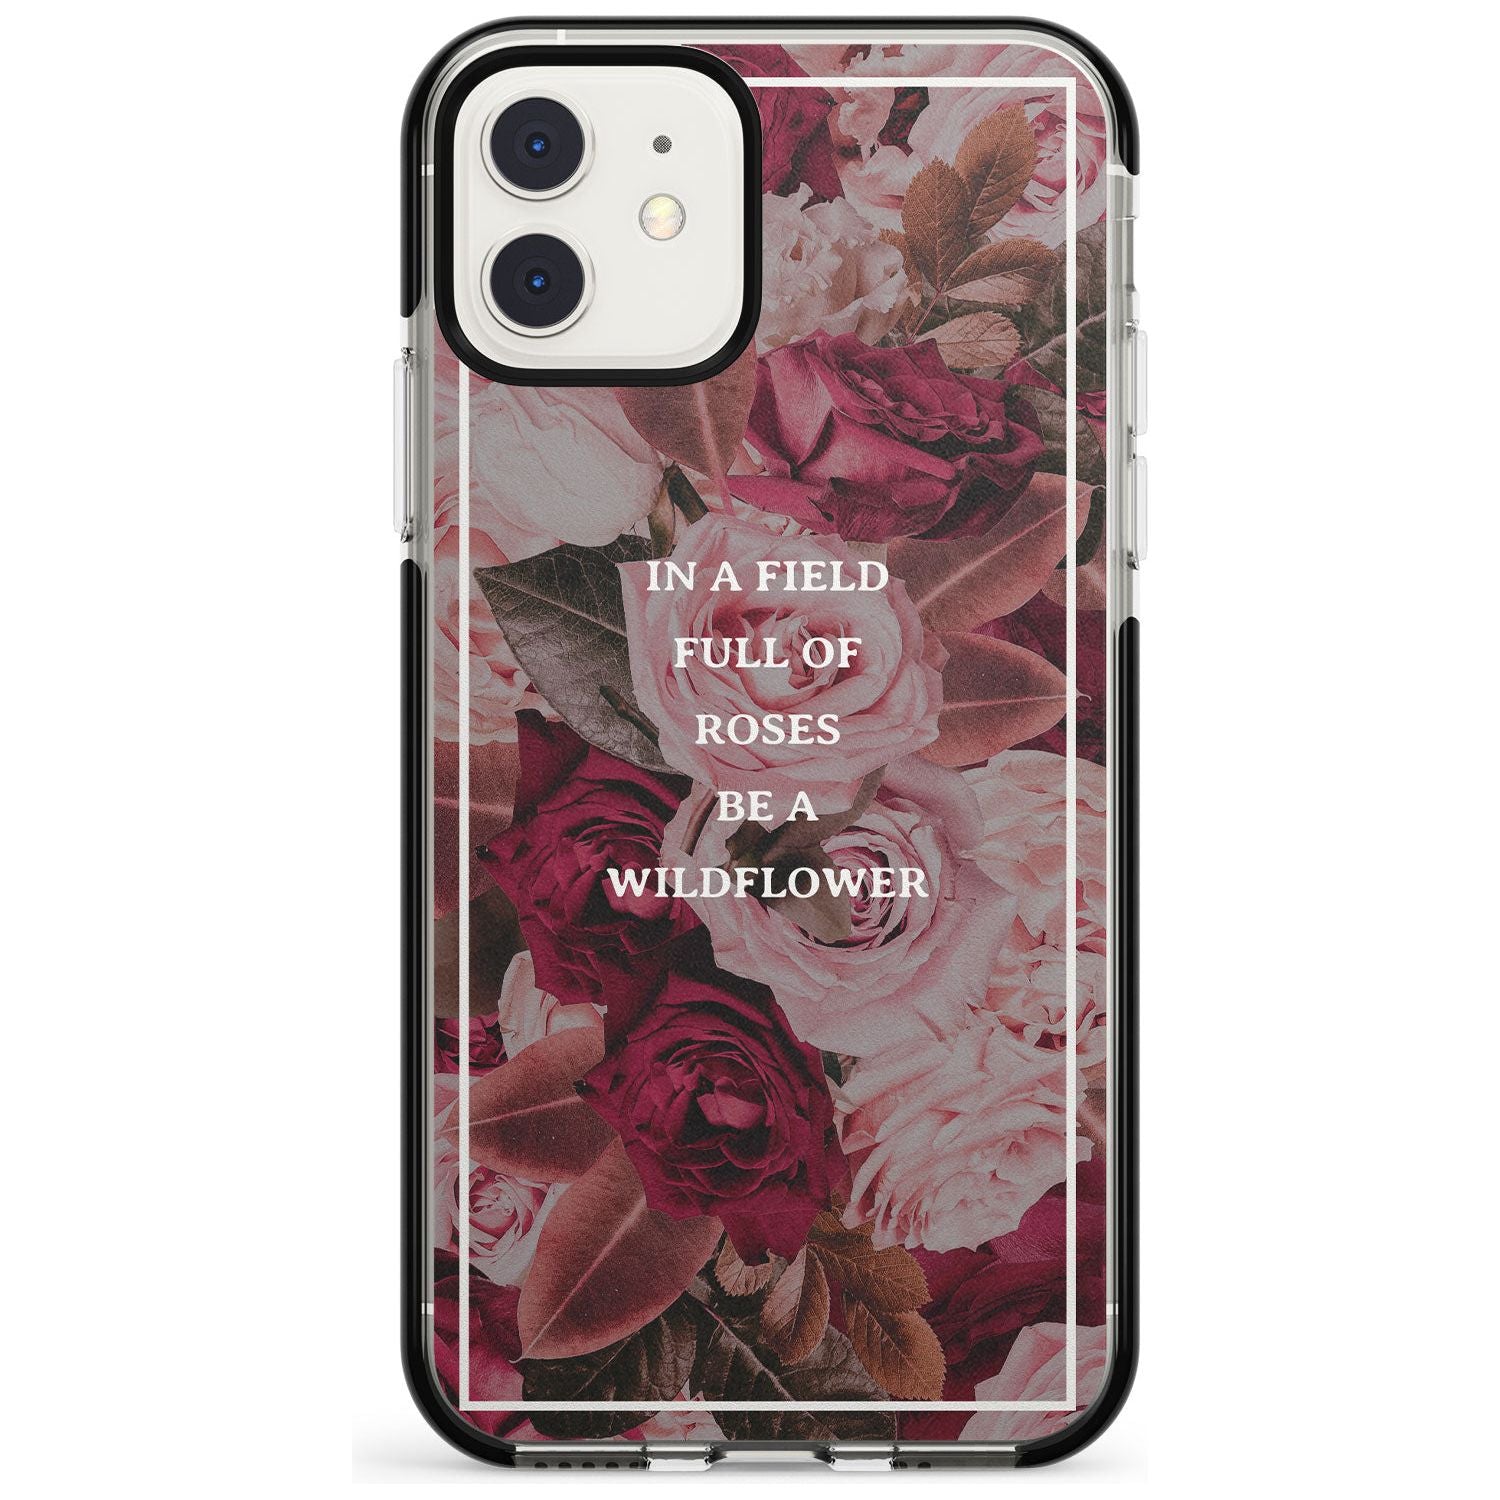 Be a Wildflower Floral Quote Black Impact Phone Case for iPhone 11